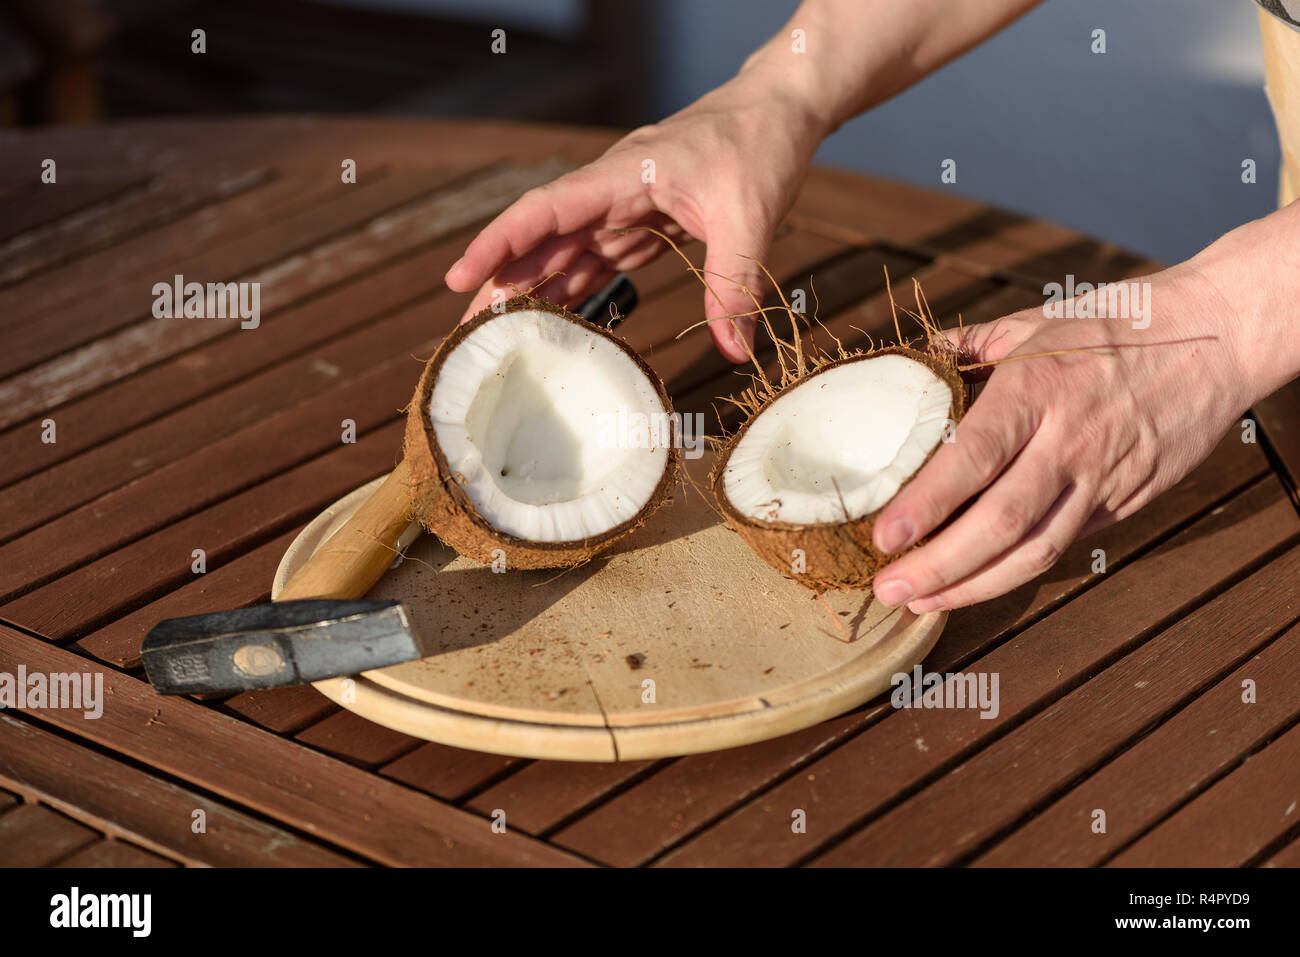 close up on hands hammering a coconut Stock Photo